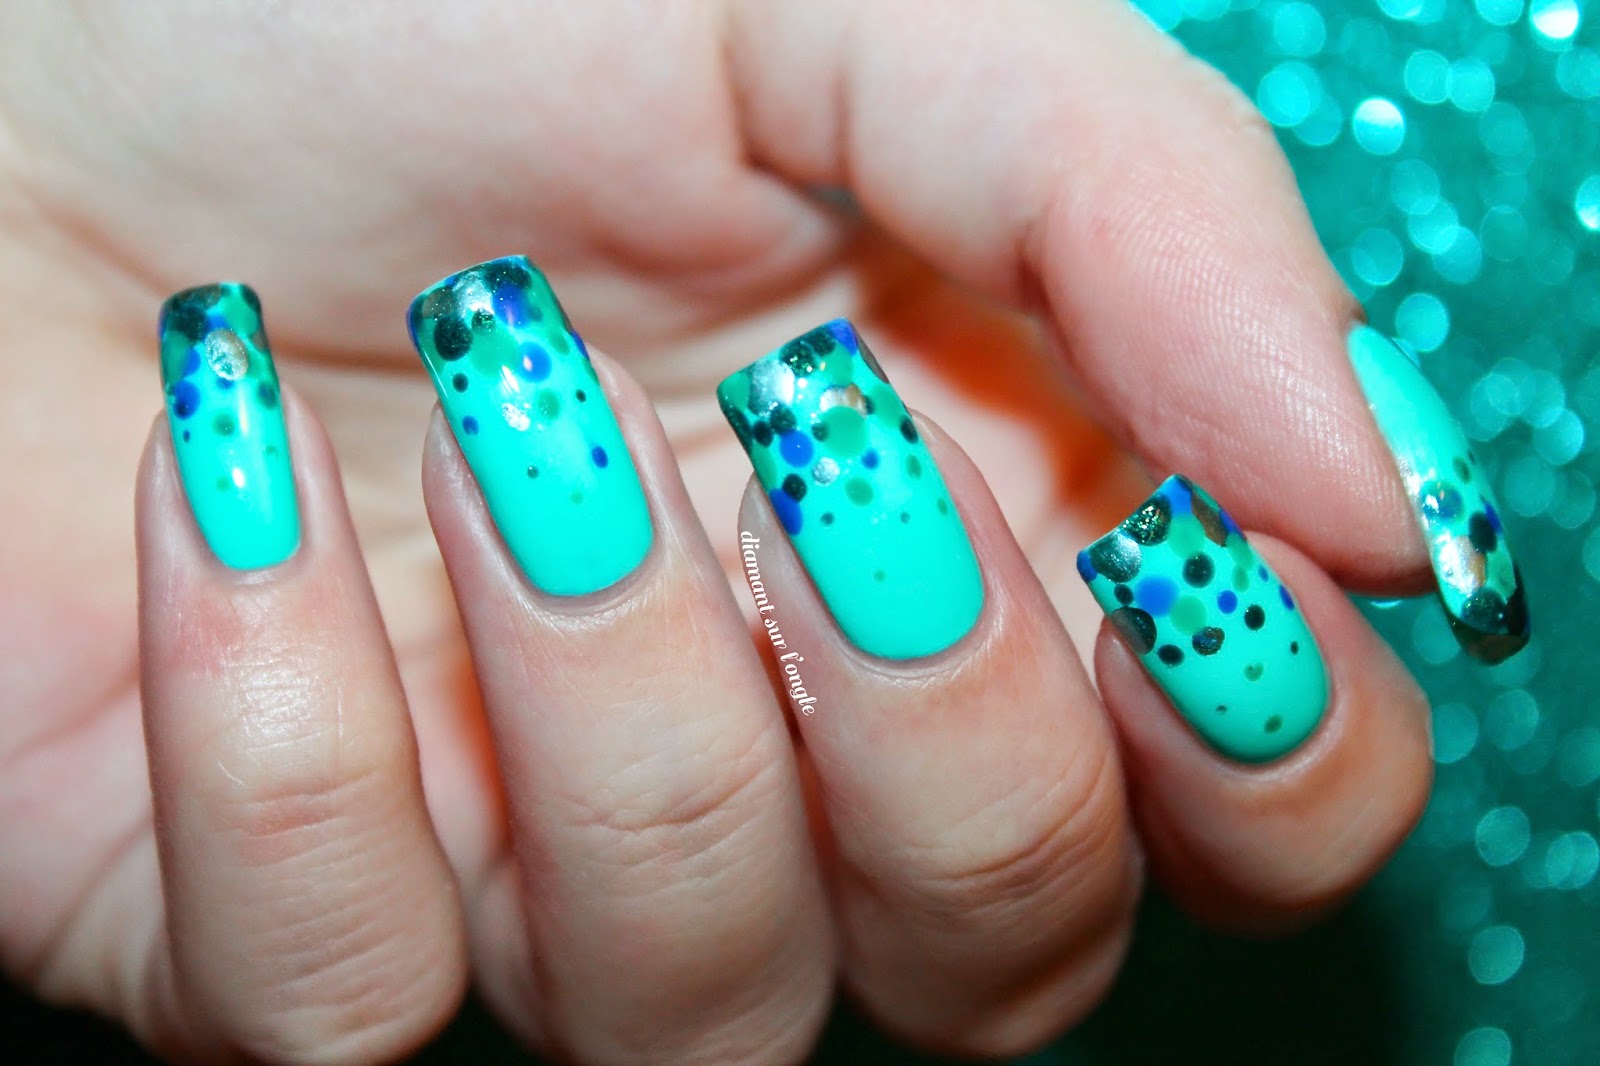 A mermaid french manicure made with a dotting tool